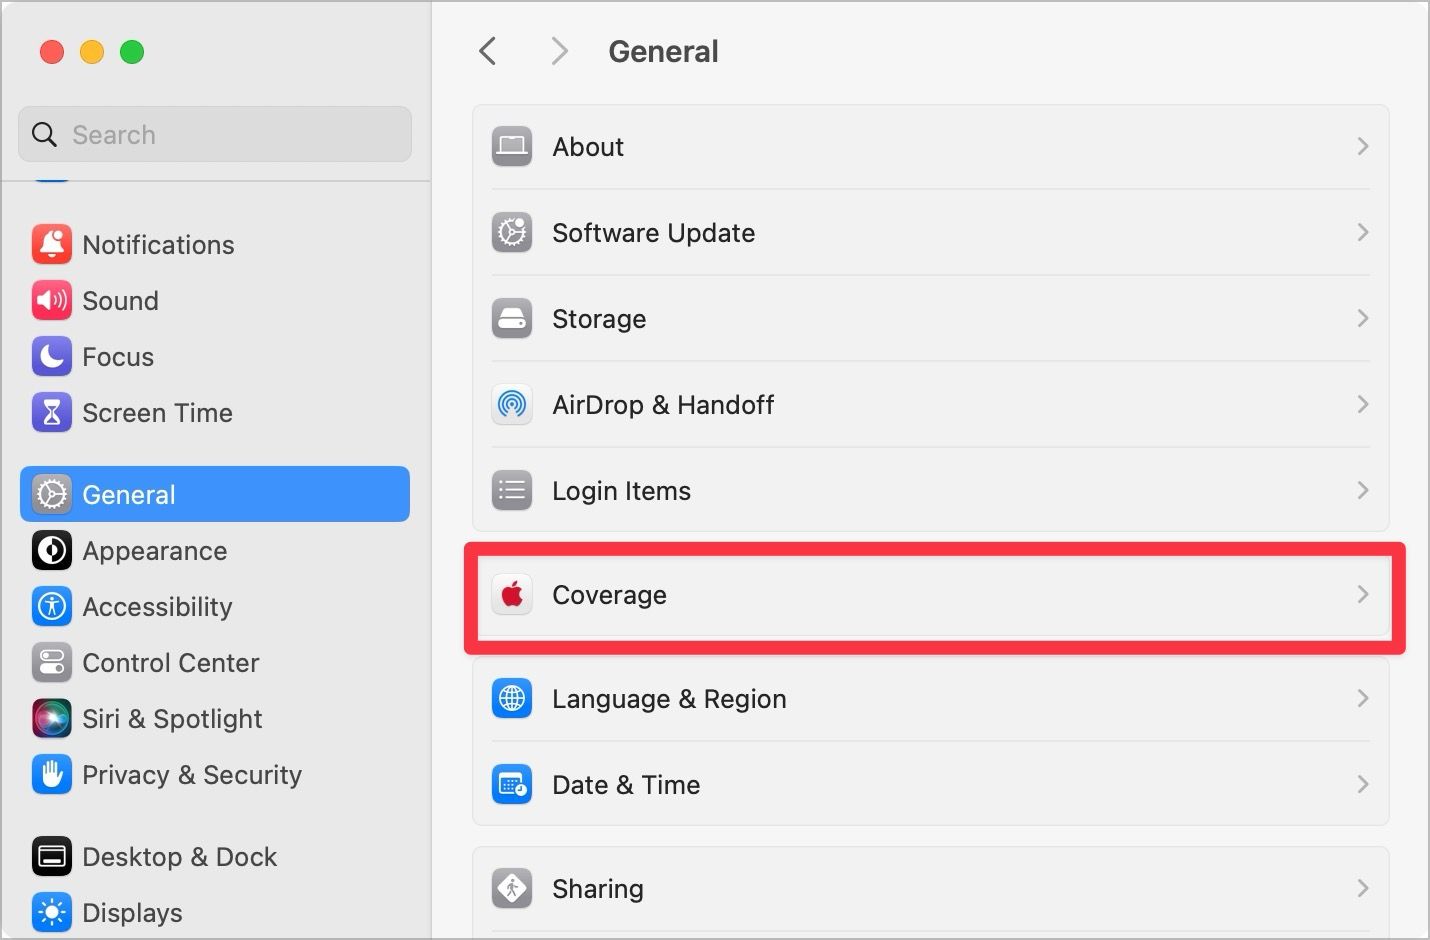 Coverage options in General Tab